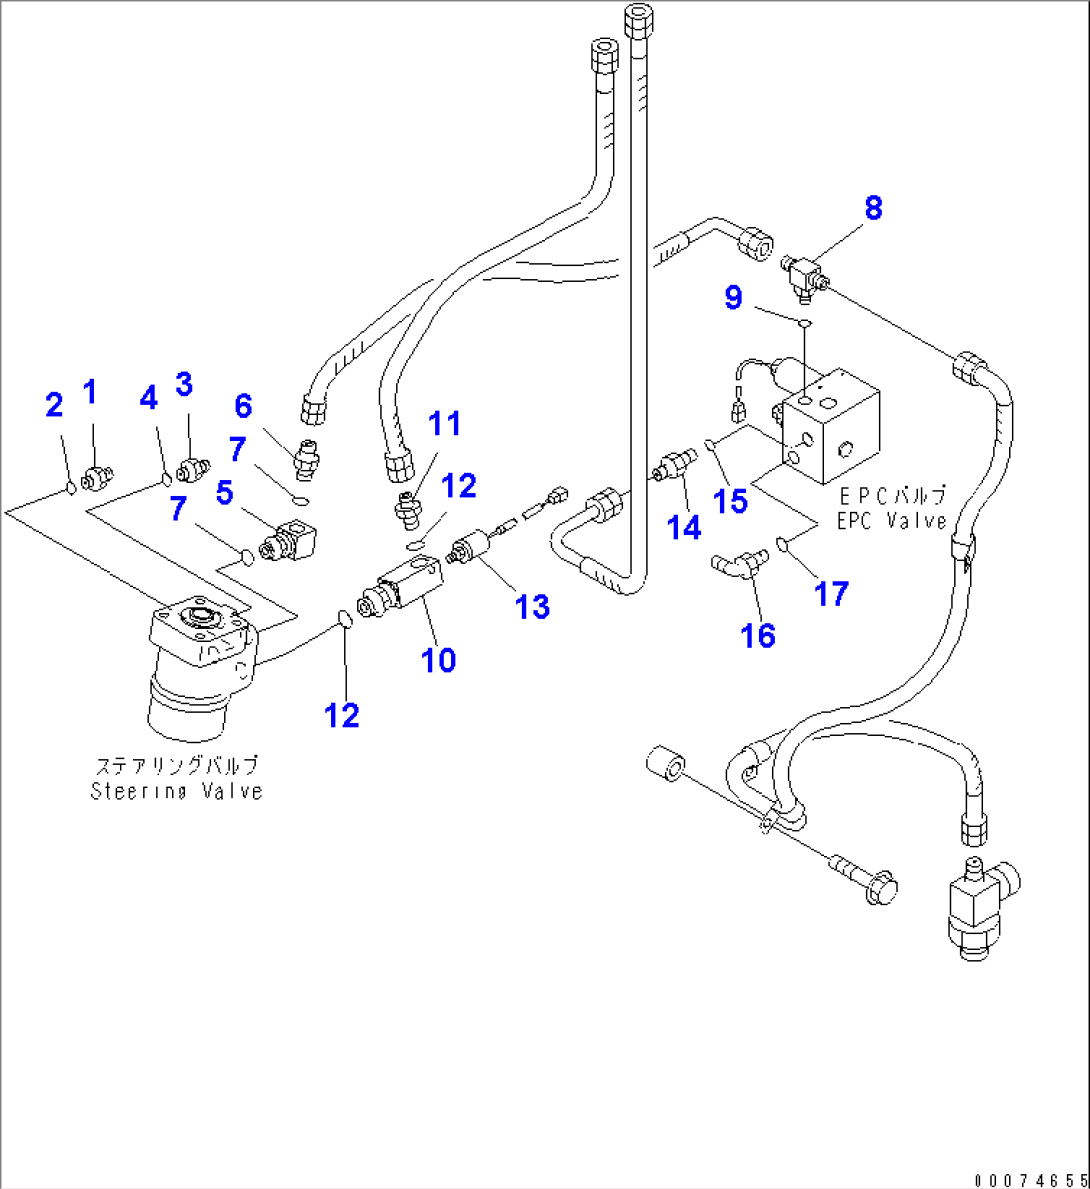 SUPPORT (STEERING VALVE TO EPC VALVE) (WITH ADVANCED JOY STICK STEERING)(#51075-)